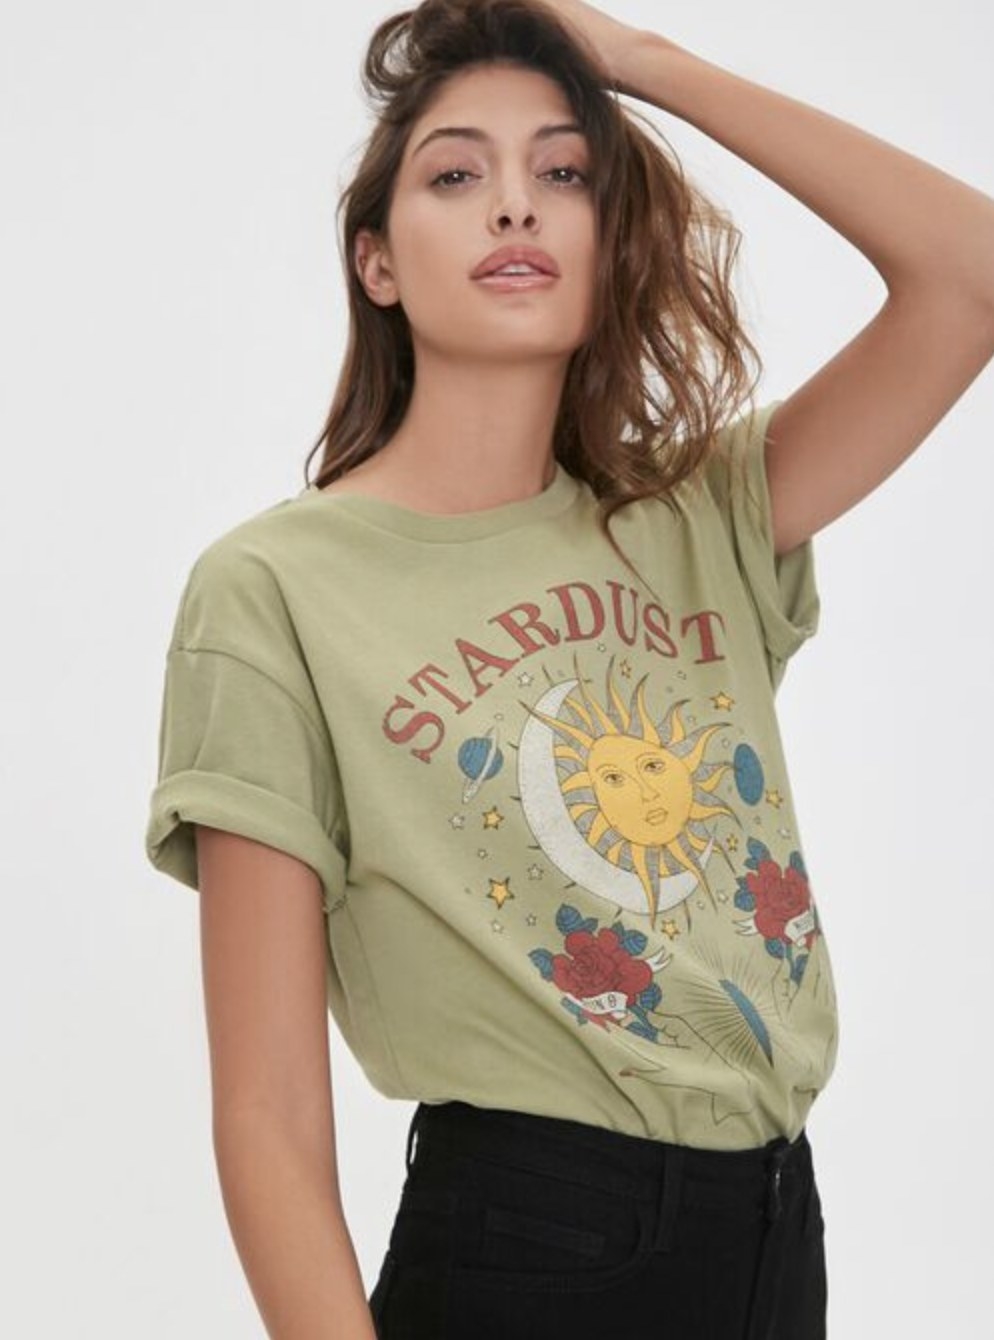 Model is wearing a pale green graphic tee and black jeans